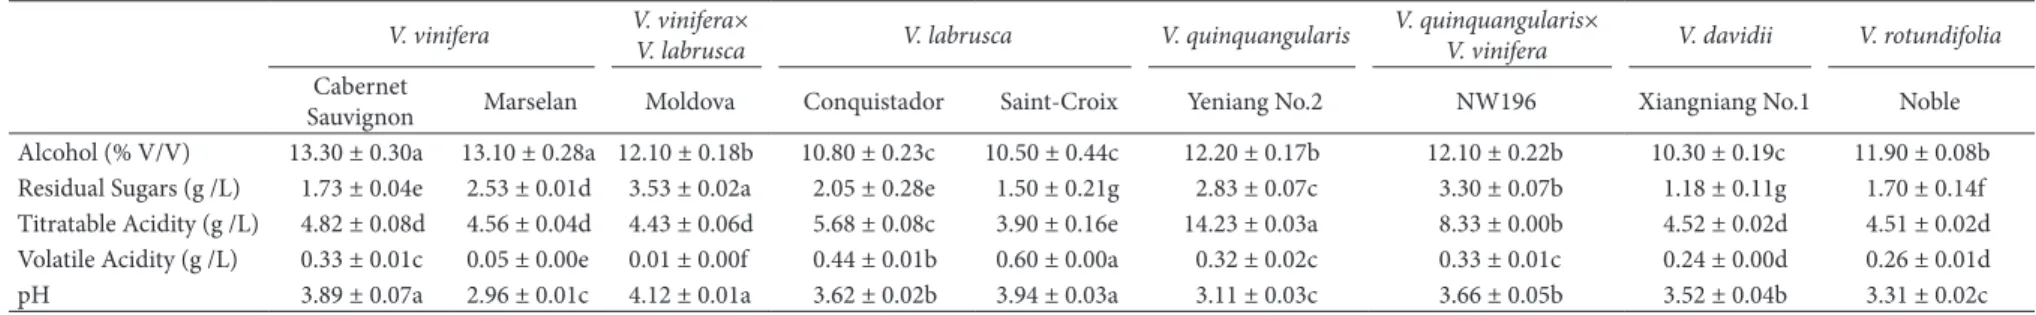 Table S1. Data of plant materials from nine different wine grape varieties in southern China.